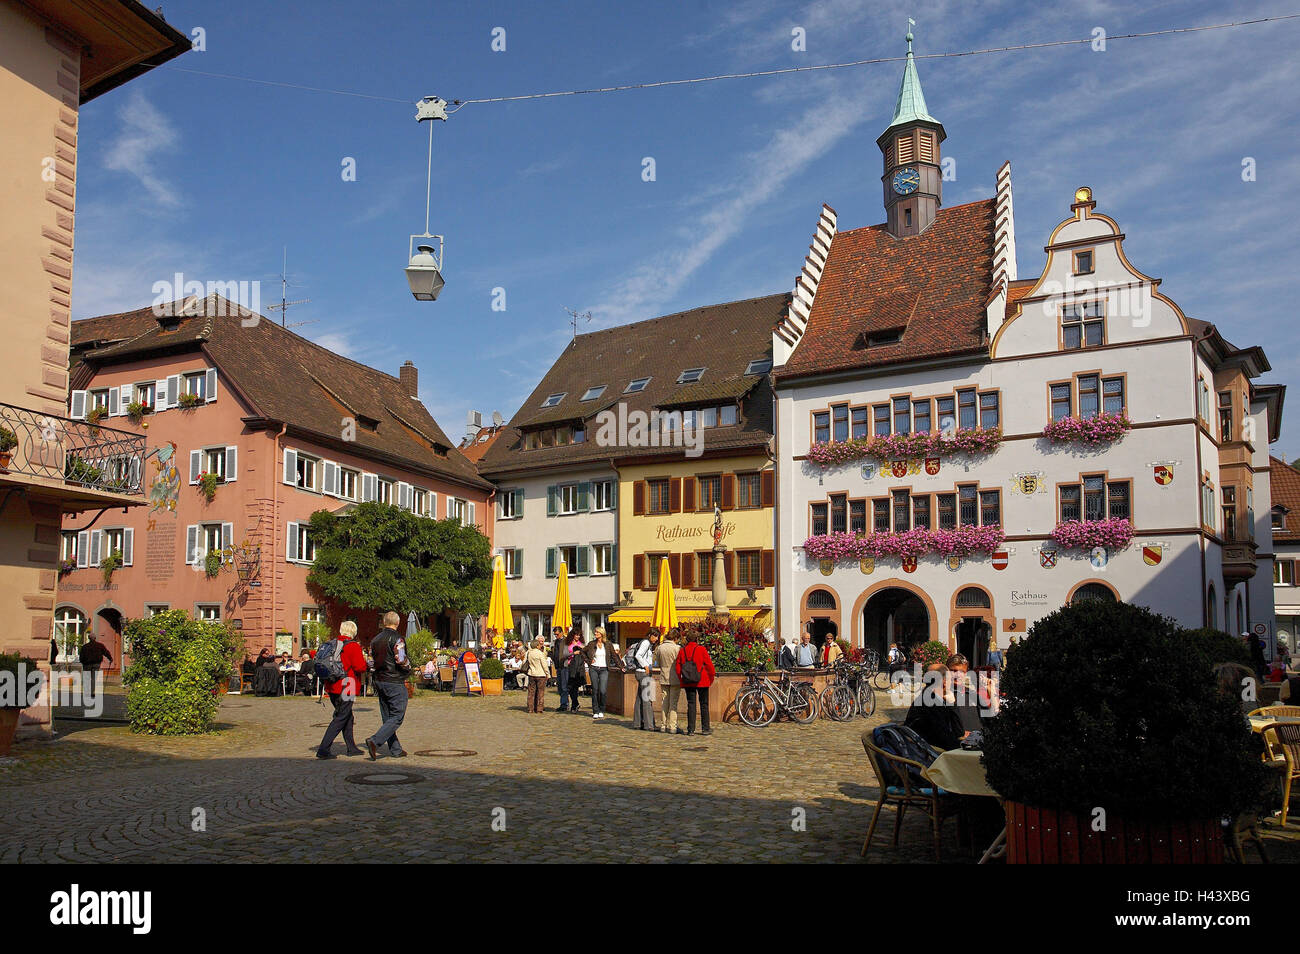 Germany, Baden-Wurttemberg, Black Forest, Staufen, Old Town, city hall square, tourist, South Germany, Breisgau, Markgräfler country, wine-growing area, wine region, building, houses, architecture, person, tourism, well, cafes, street cafe, Stock Photo